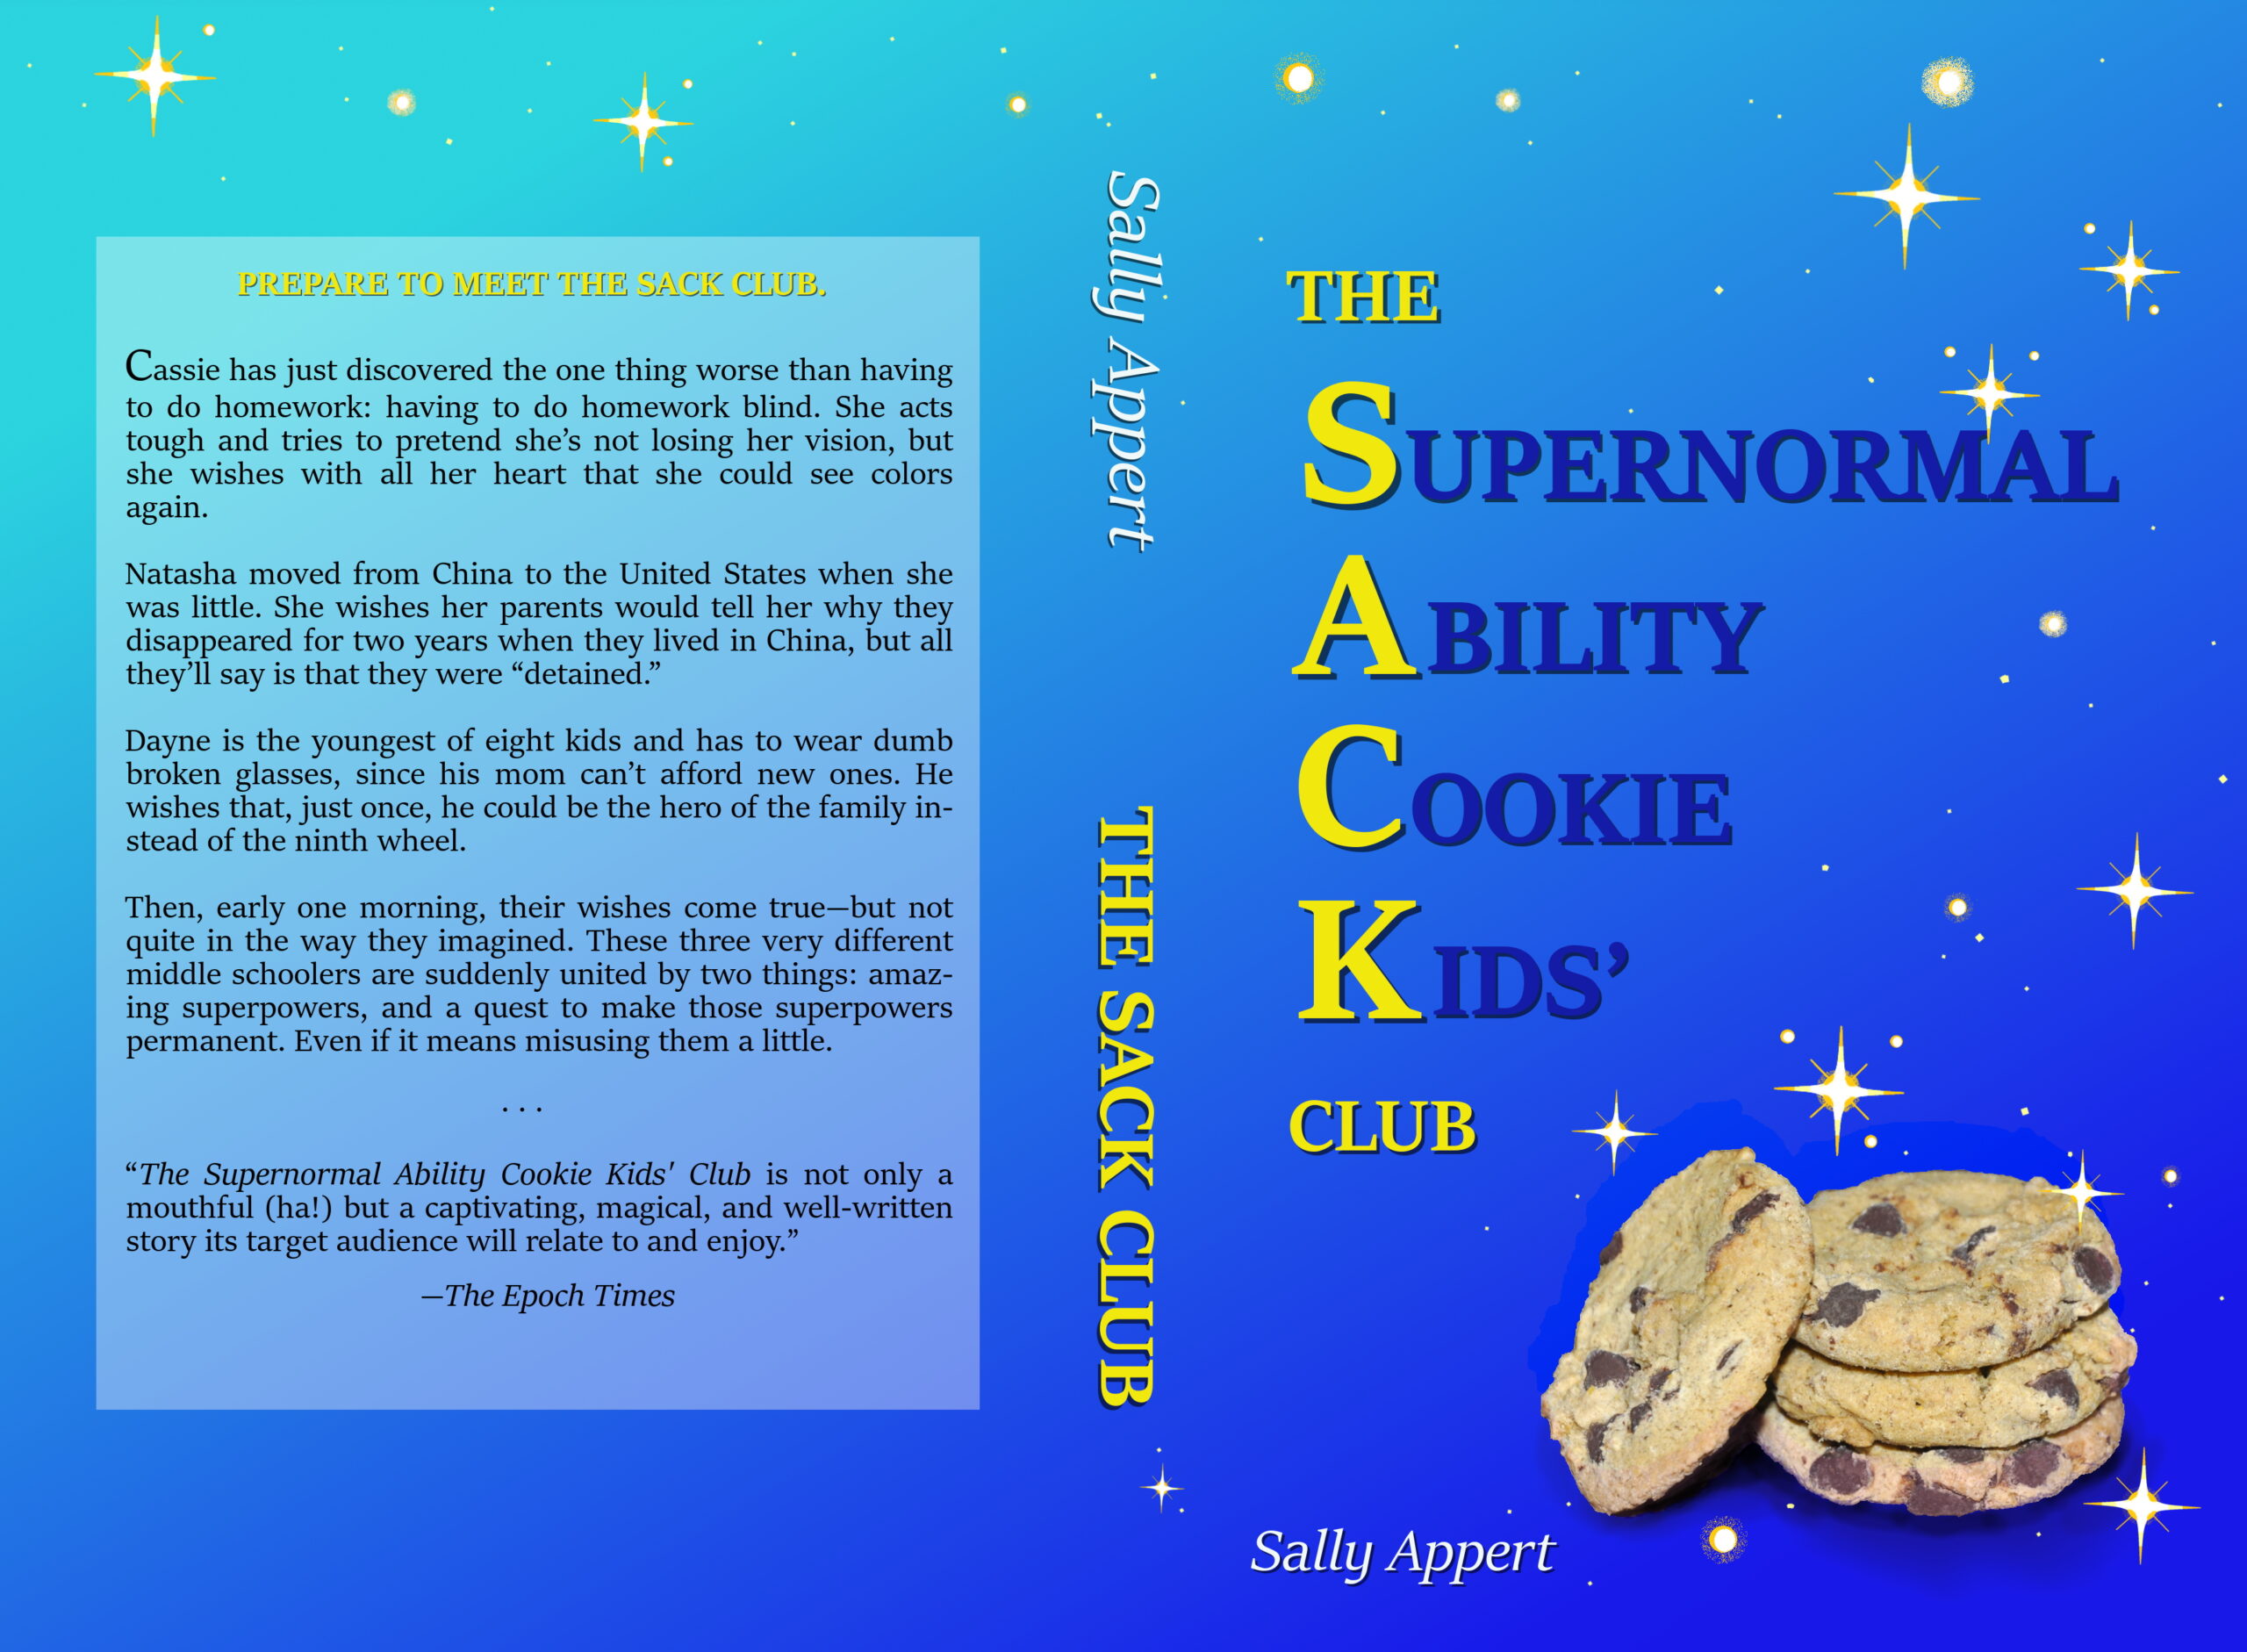 FREE: The Supernormal Ability Cookie Kids’ Club by Sally Appert